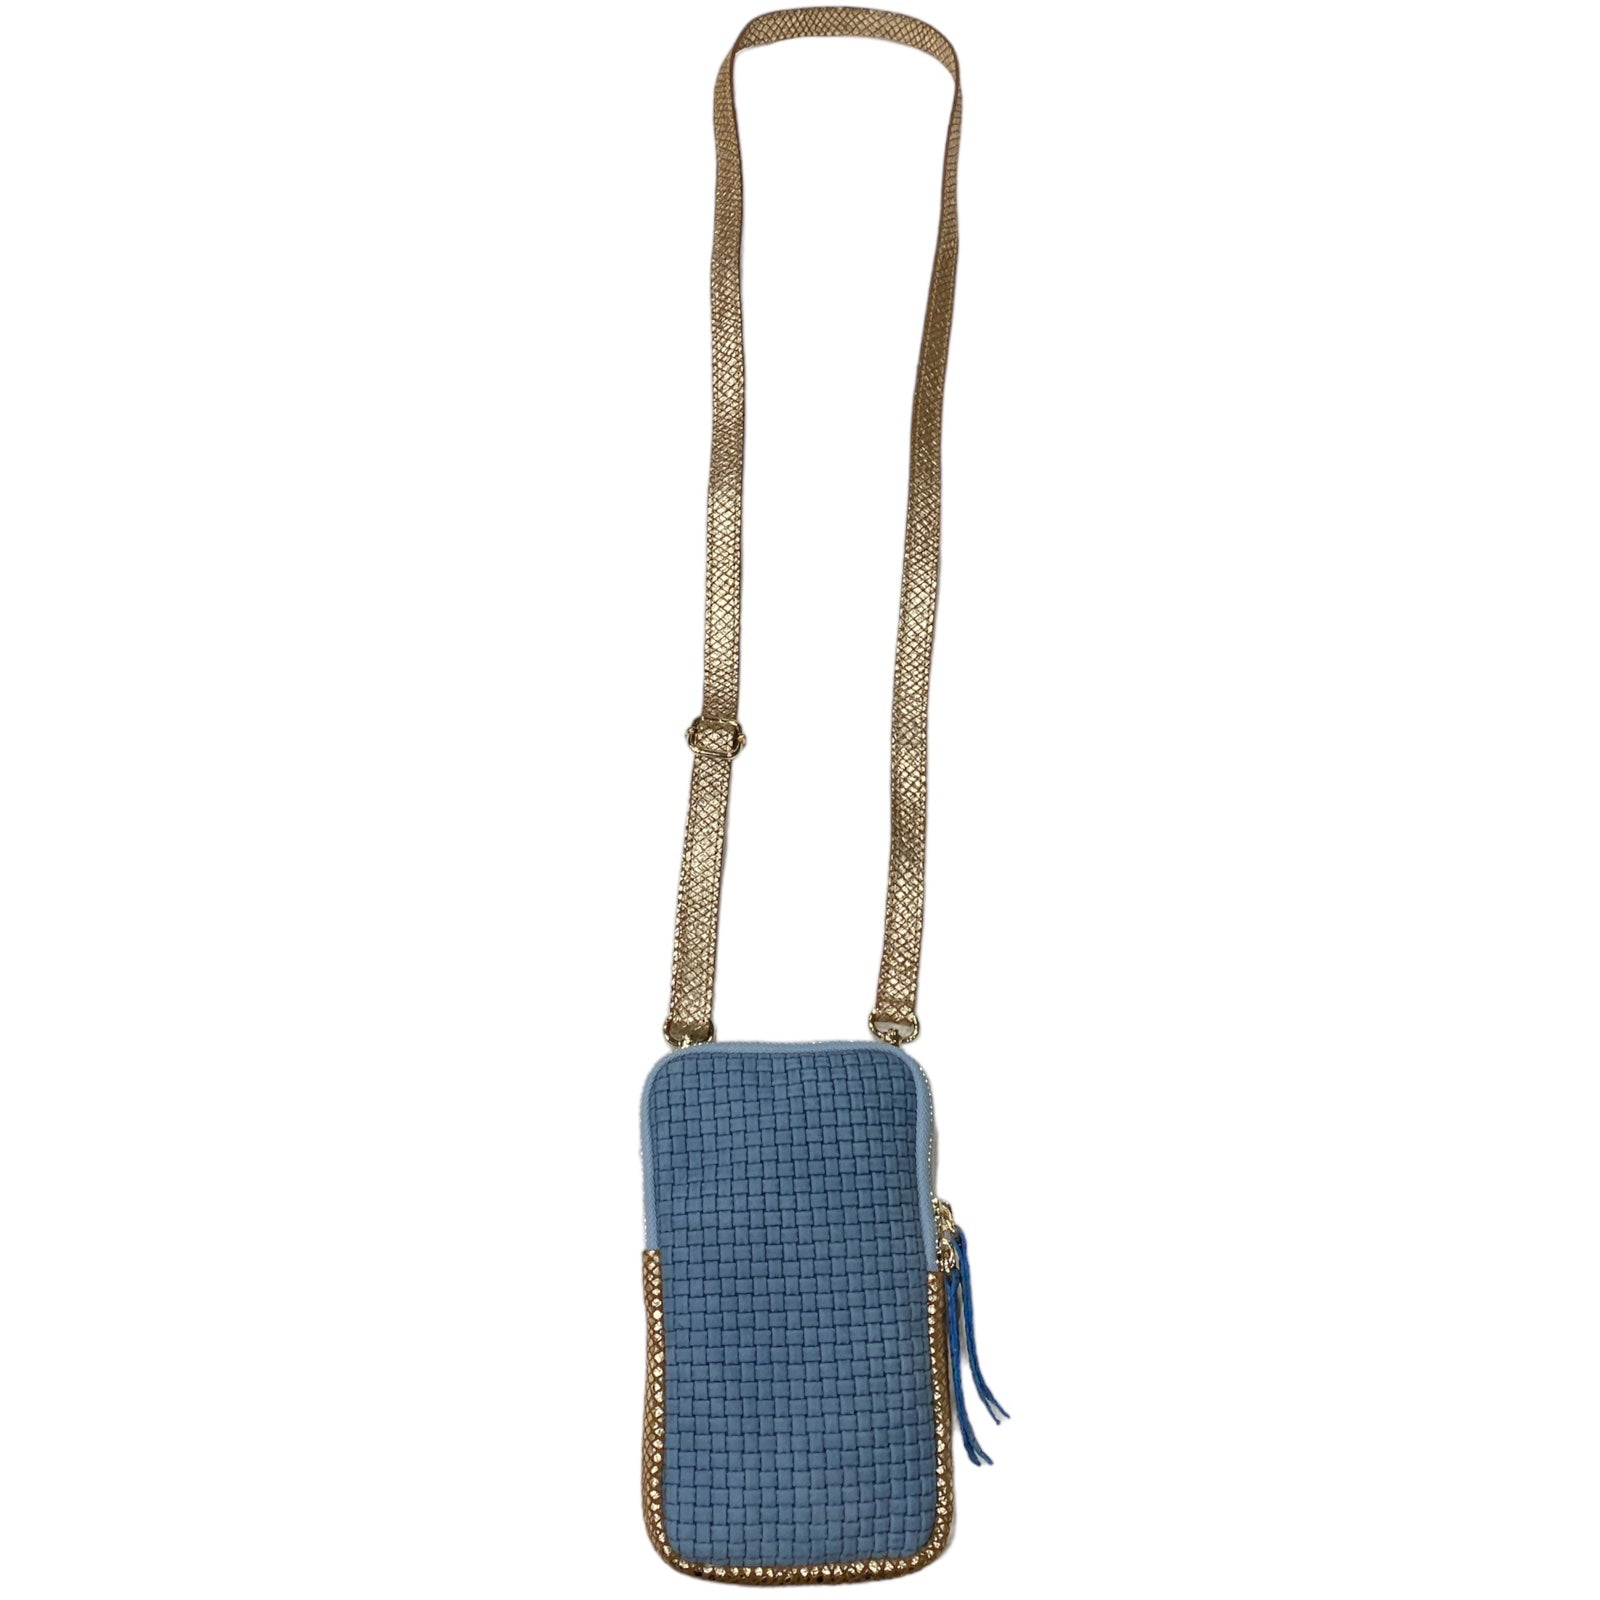 Raf blue woven-print and gold mobile leather case